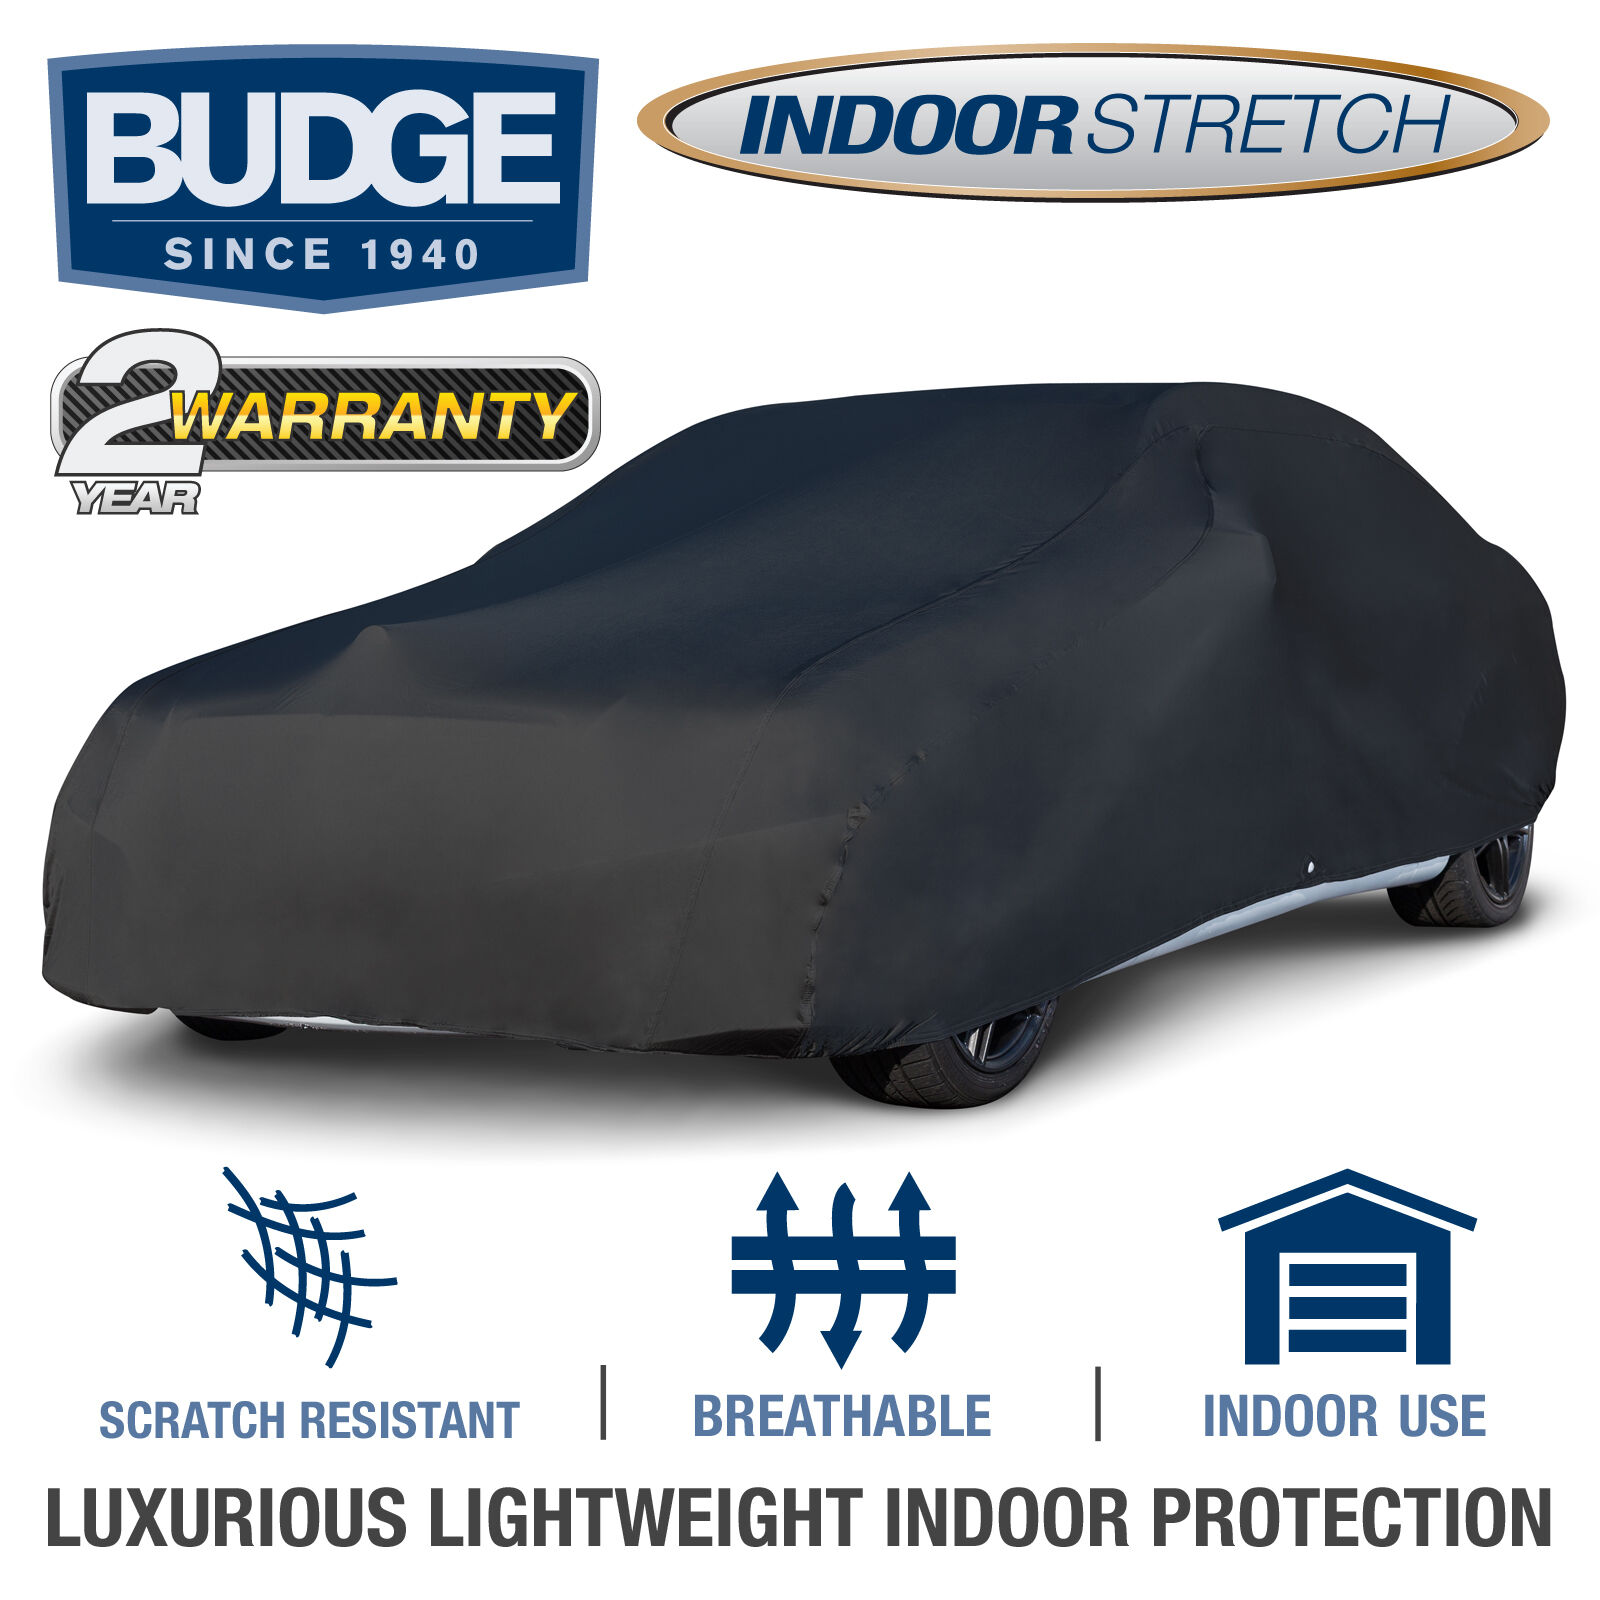 Indoor Stretch Car Cover Fits Volkswagen Jetta 2001| UV Protect |Breathable